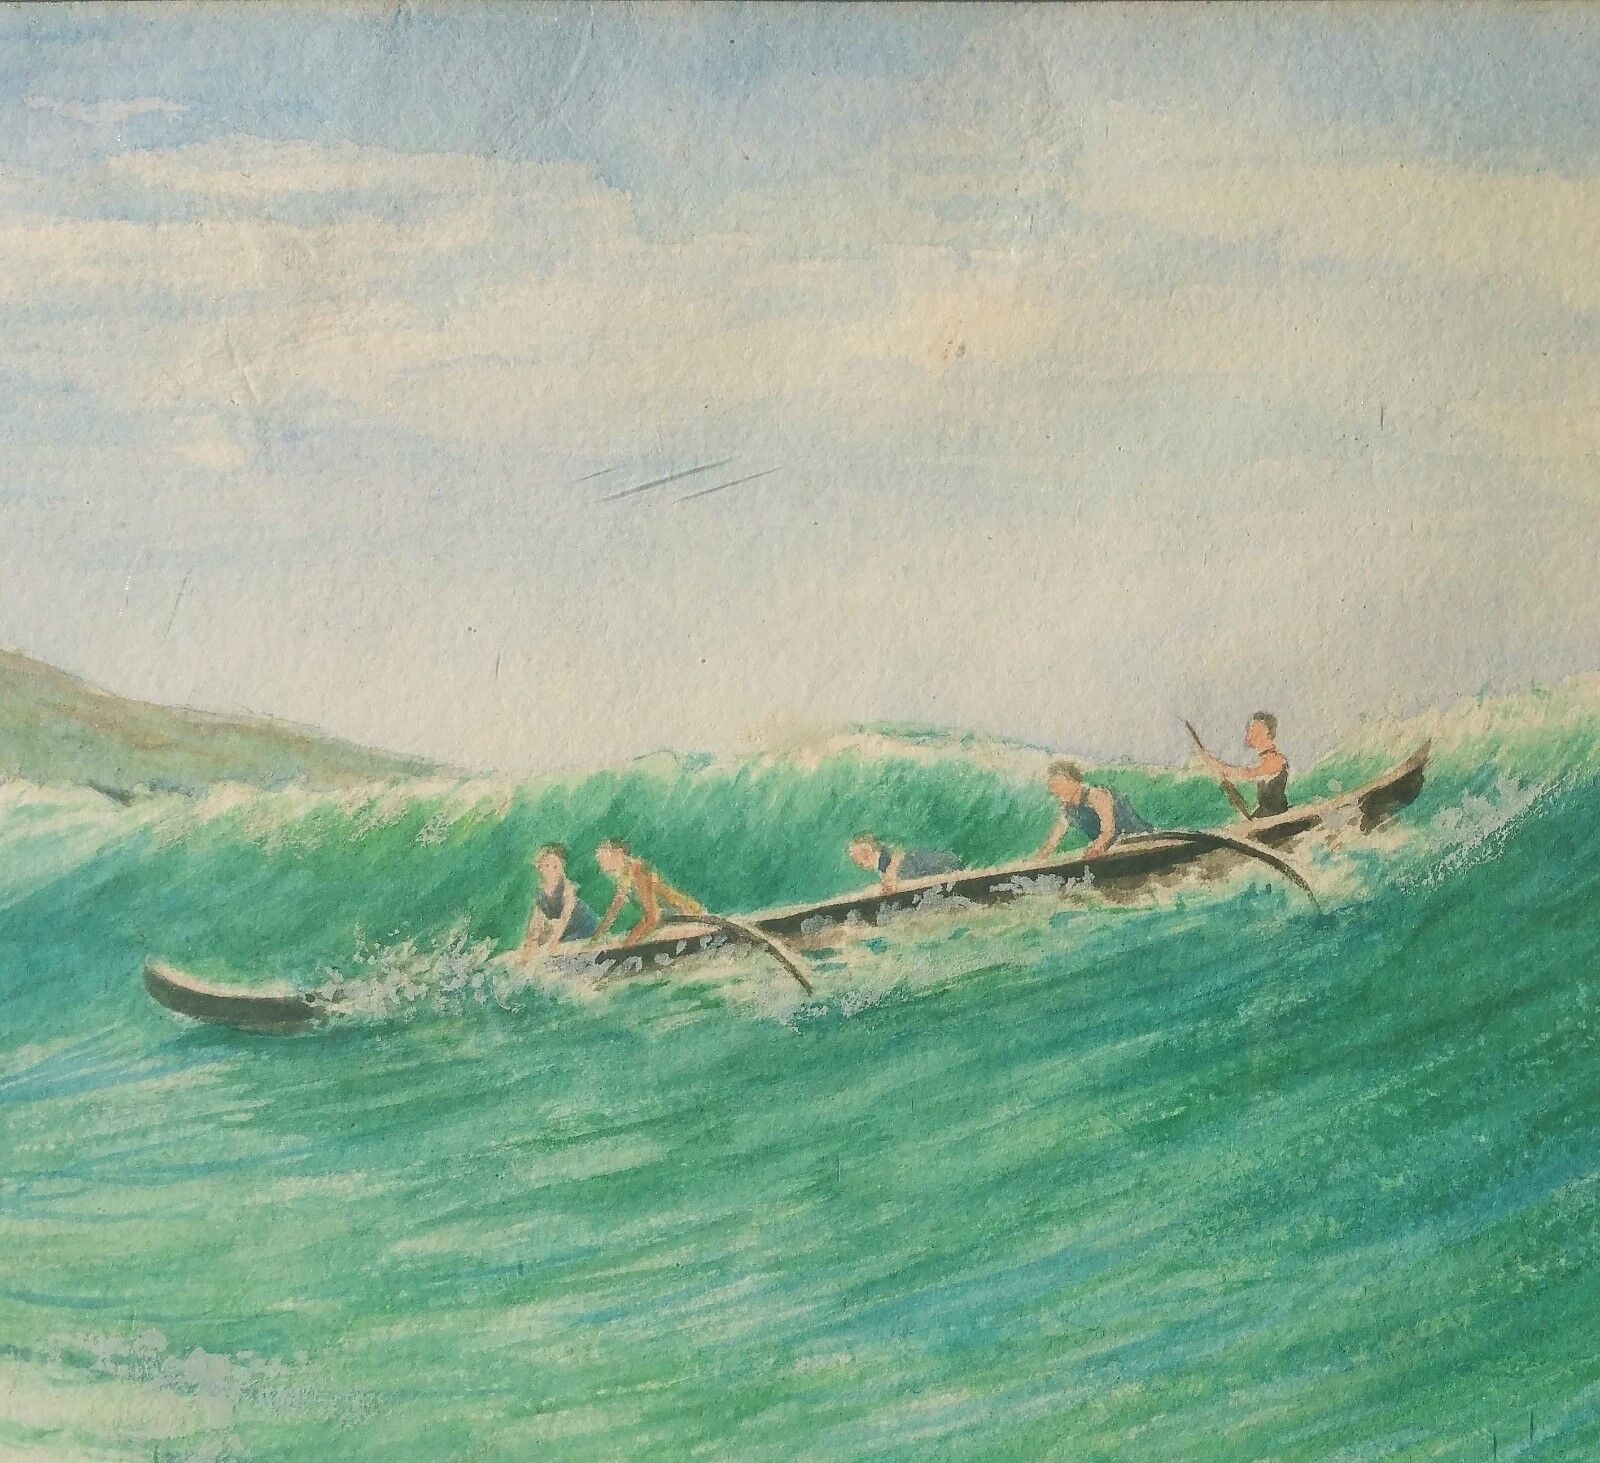 Vancouver B.C. Canada antique hawaiian surfboard painting vtg museum pacific art